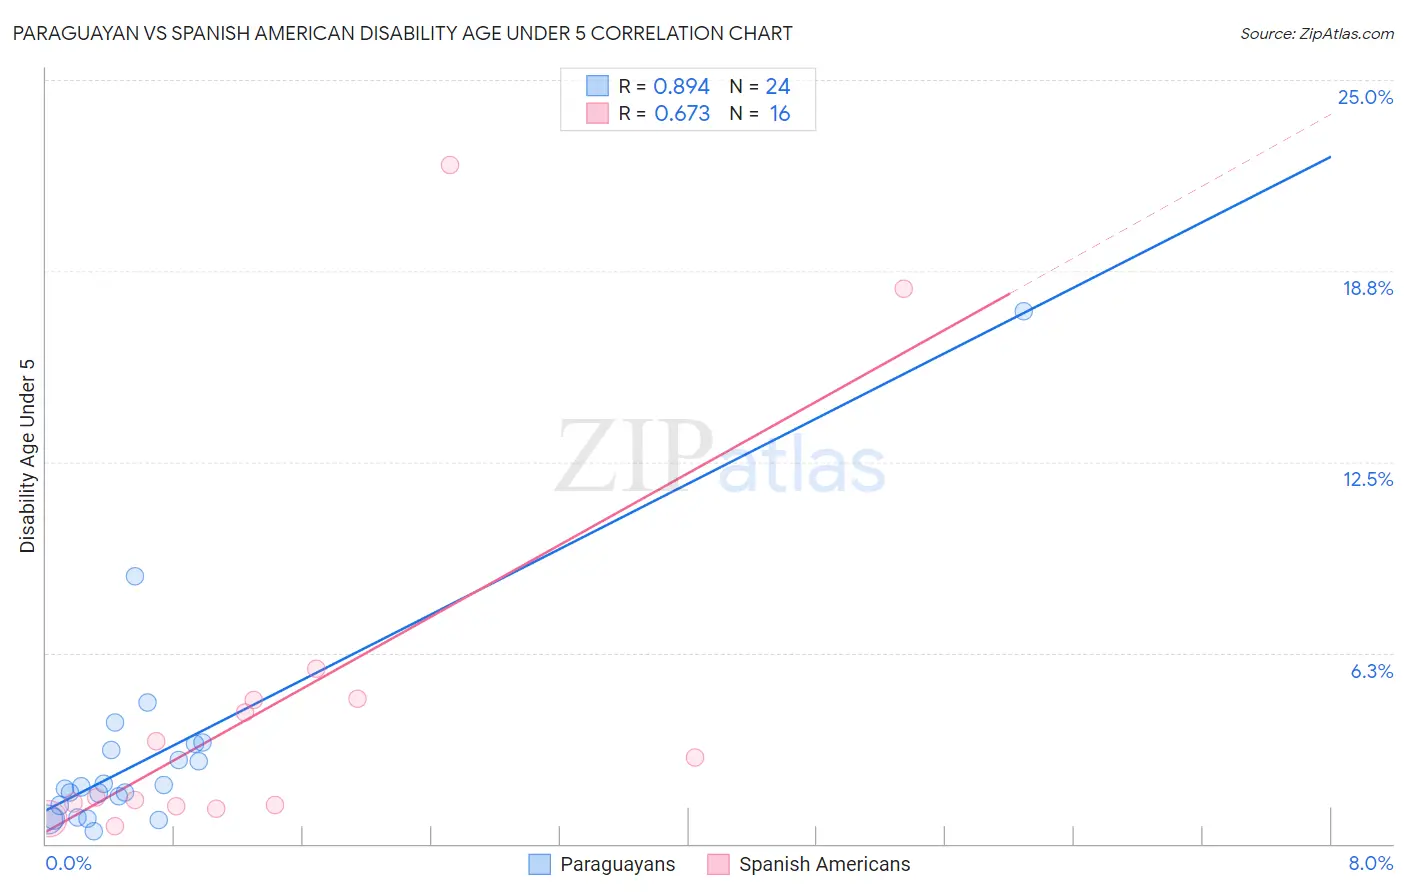 Paraguayan vs Spanish American Disability Age Under 5